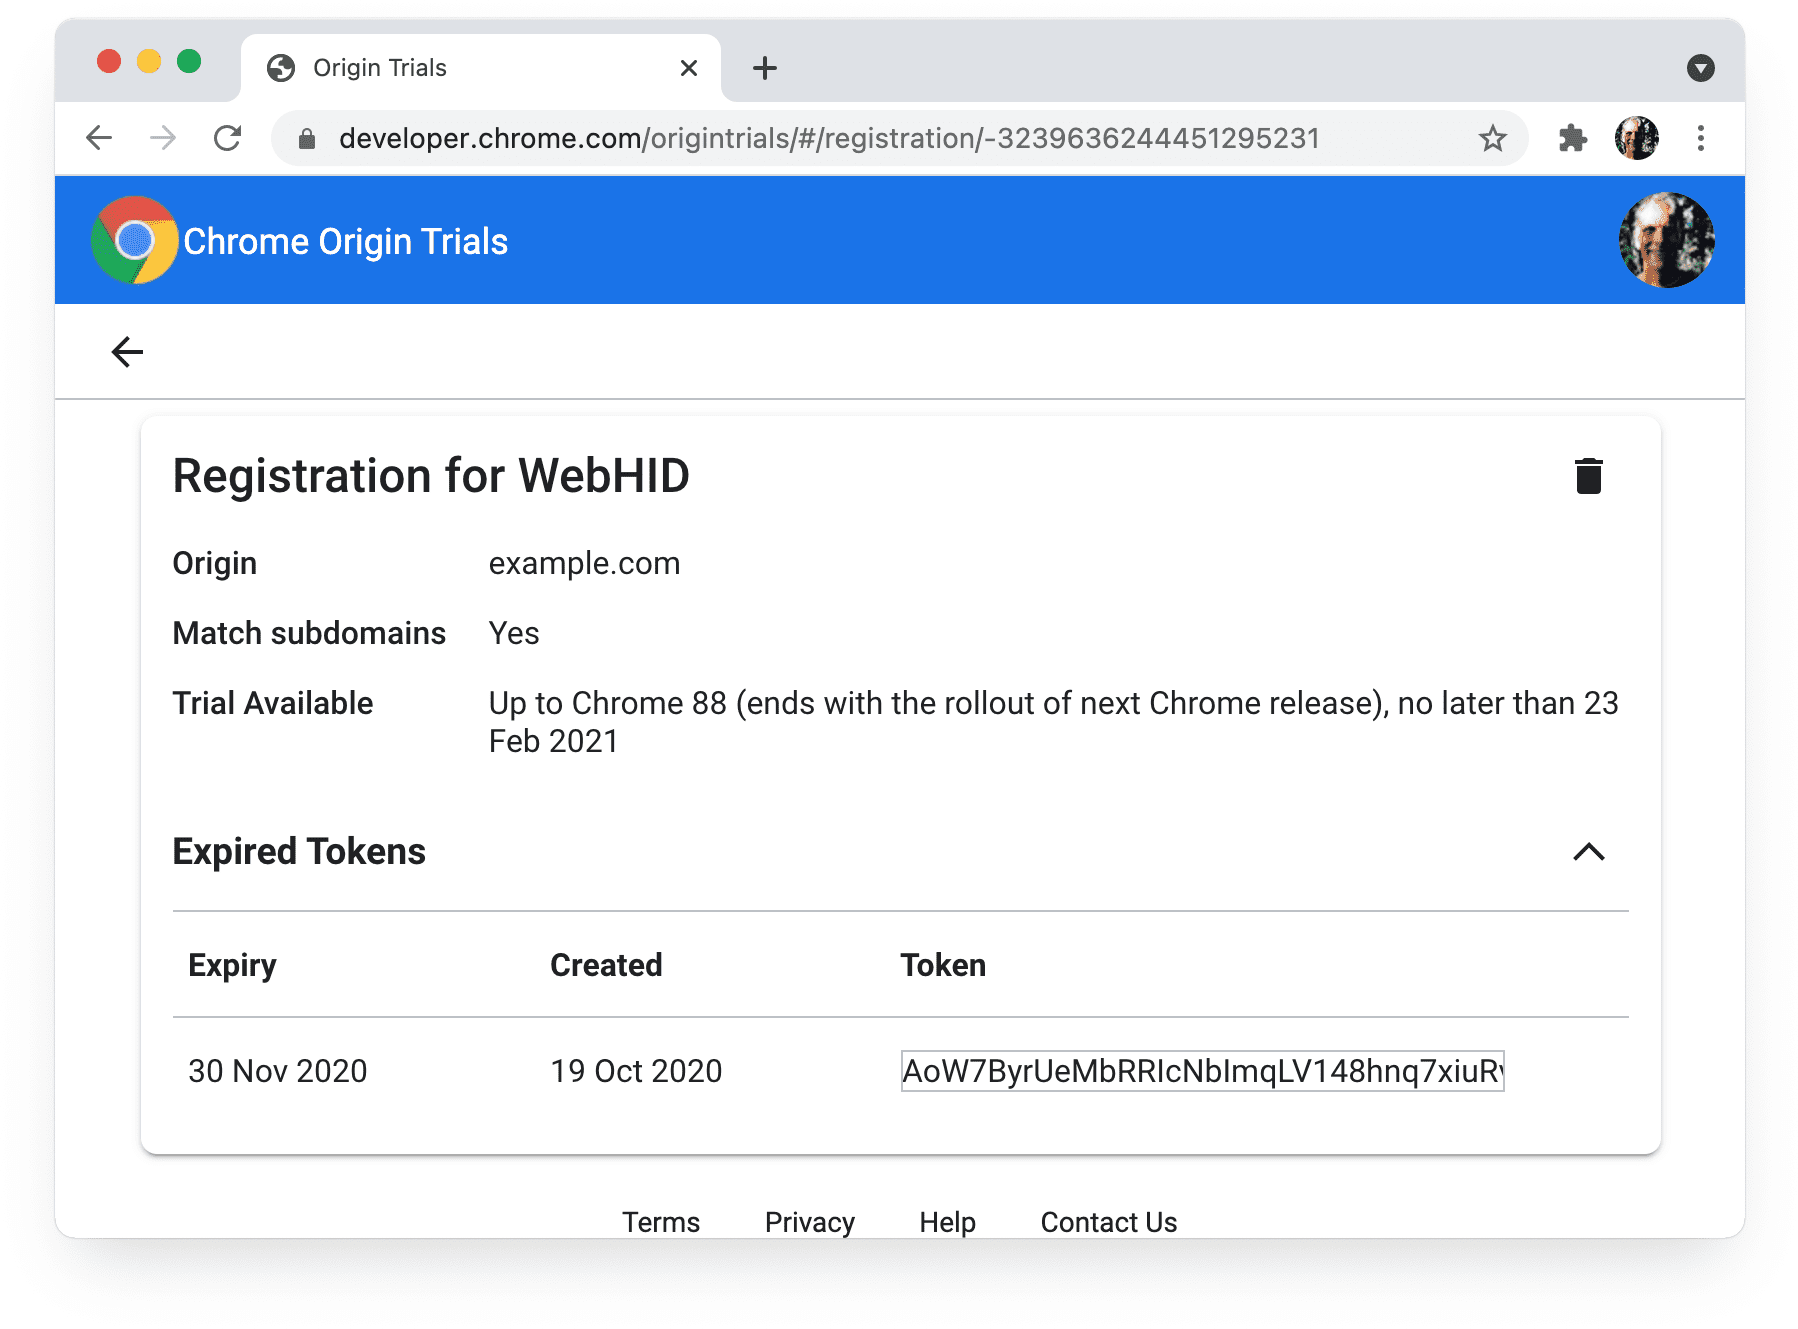 Chrome origin trials 
My Registrations page showing Valid Until date